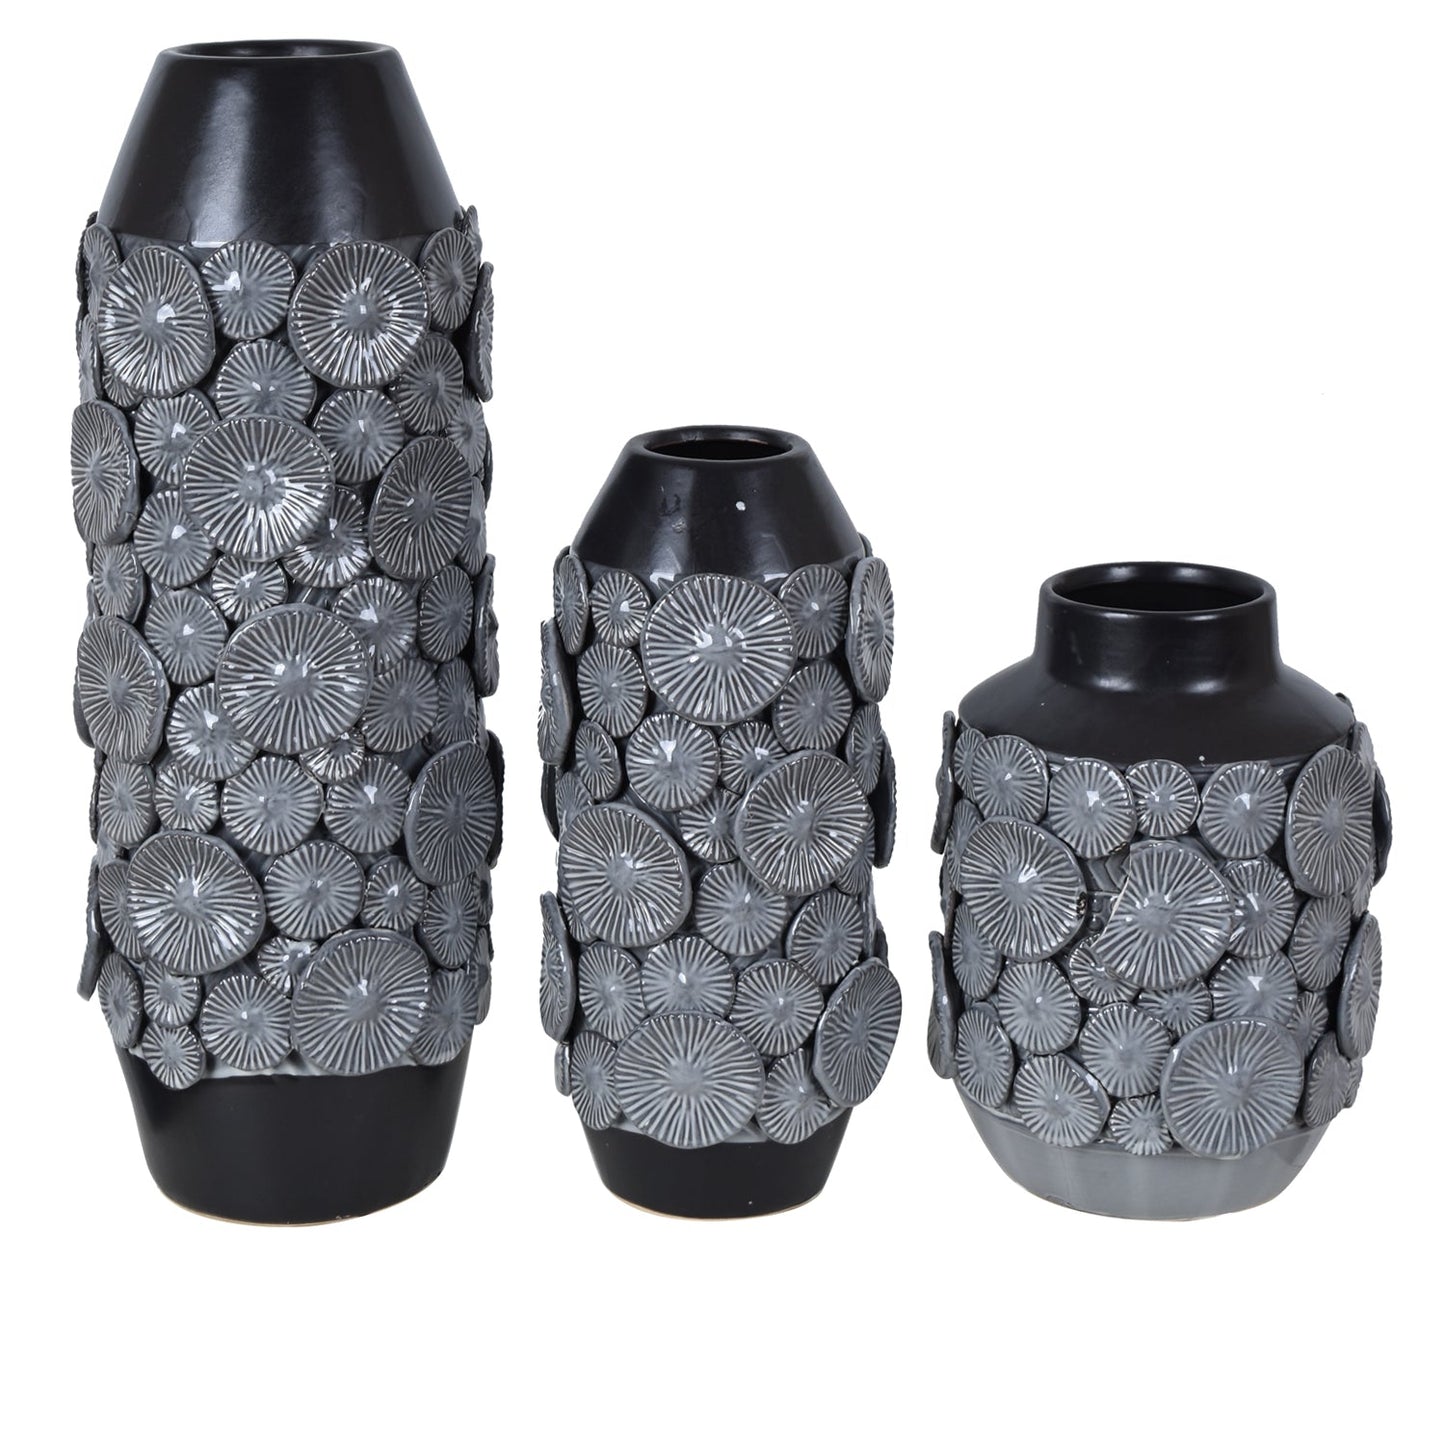 Crestview Collection Stony Brook 17" & 11" & 9" 3-Piece Transitional Ceramic Vase In Gray and Black Finish